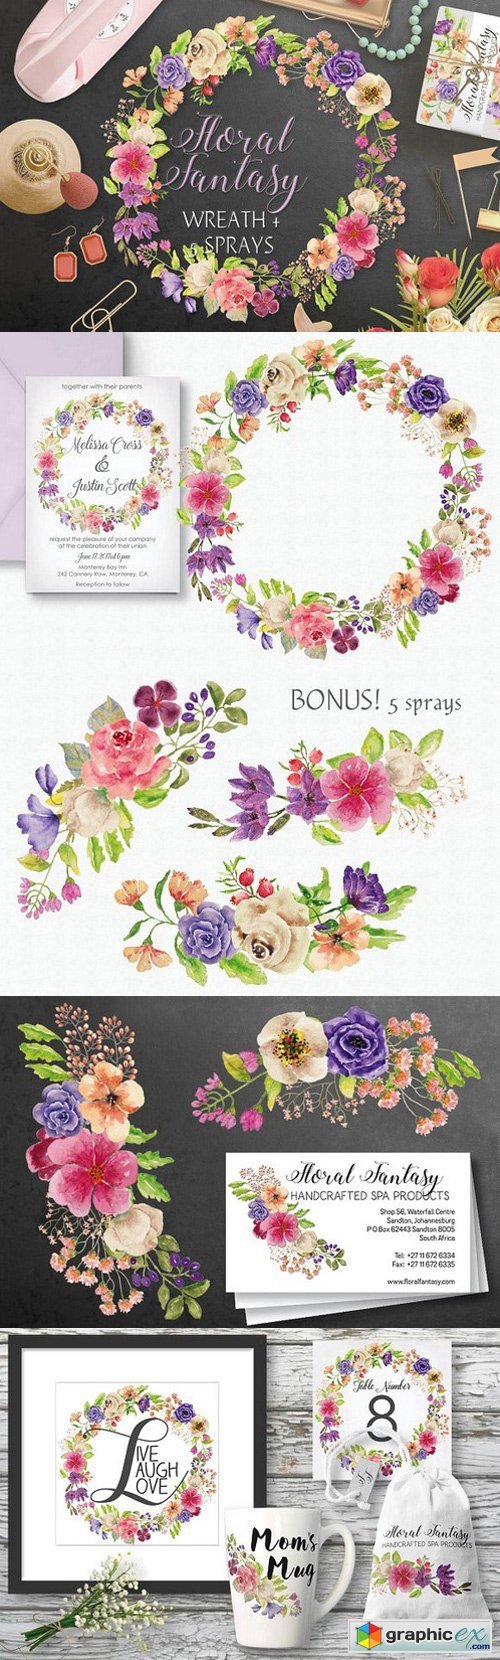 Watercolor wreath of mixed florals